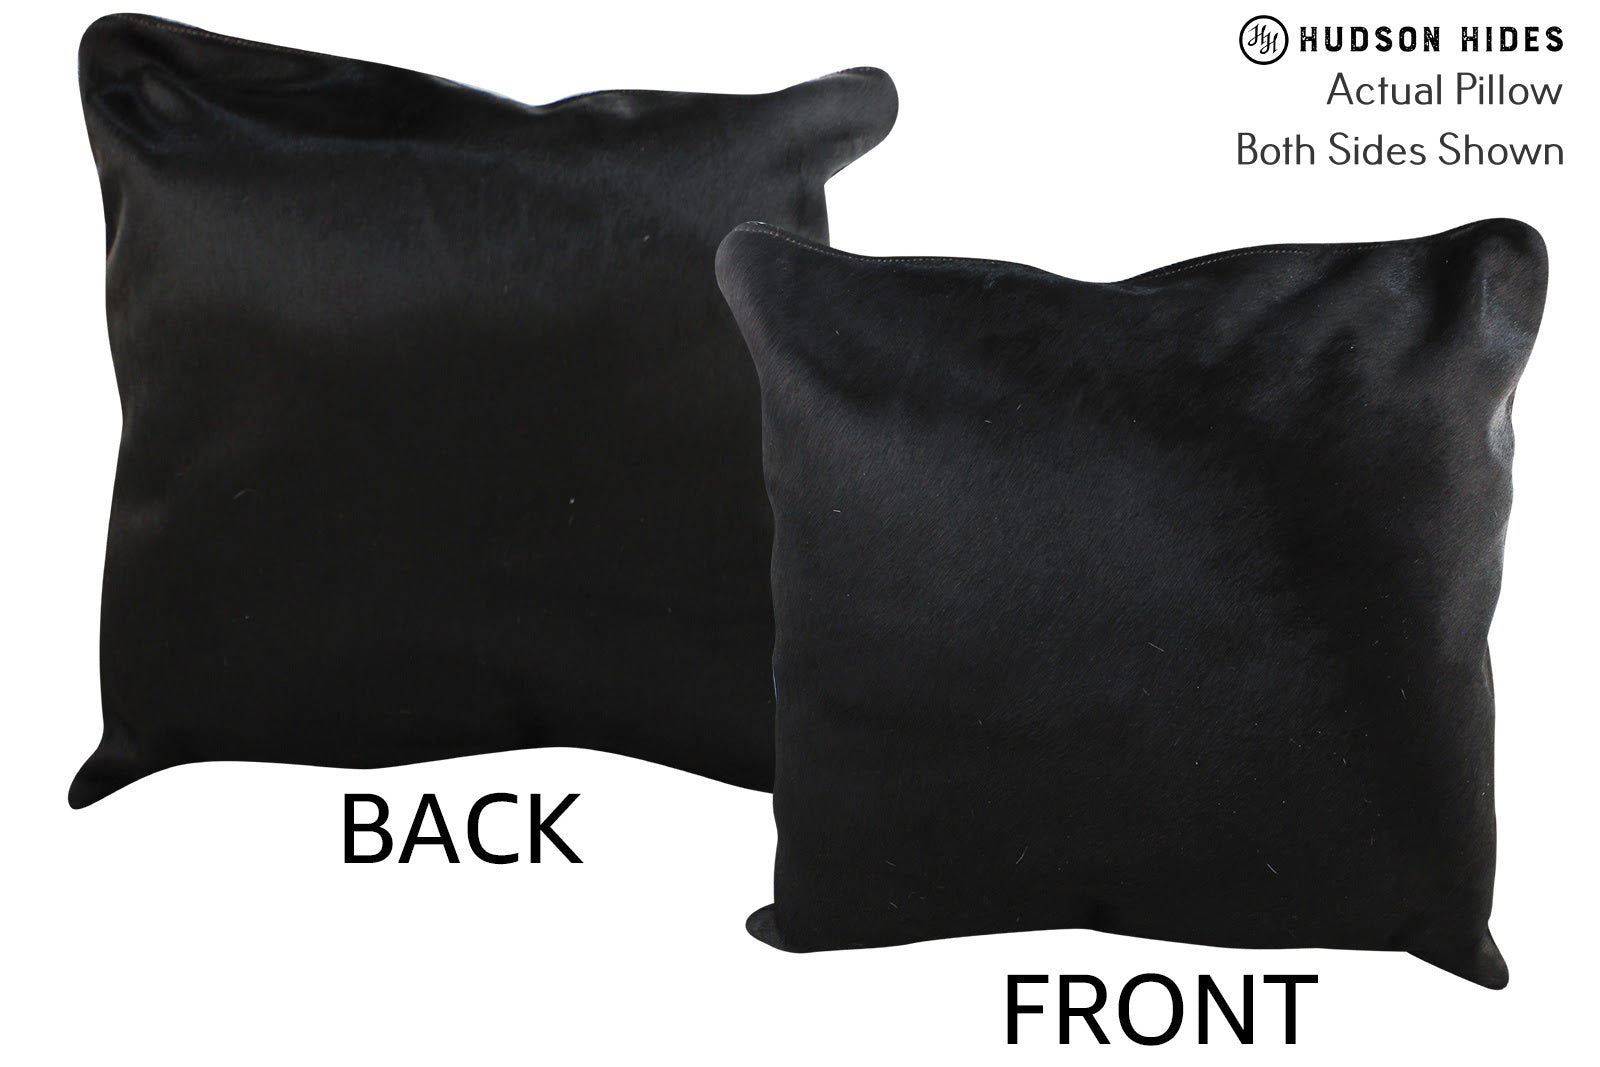 Solid Black Cowhide Pillow #75915